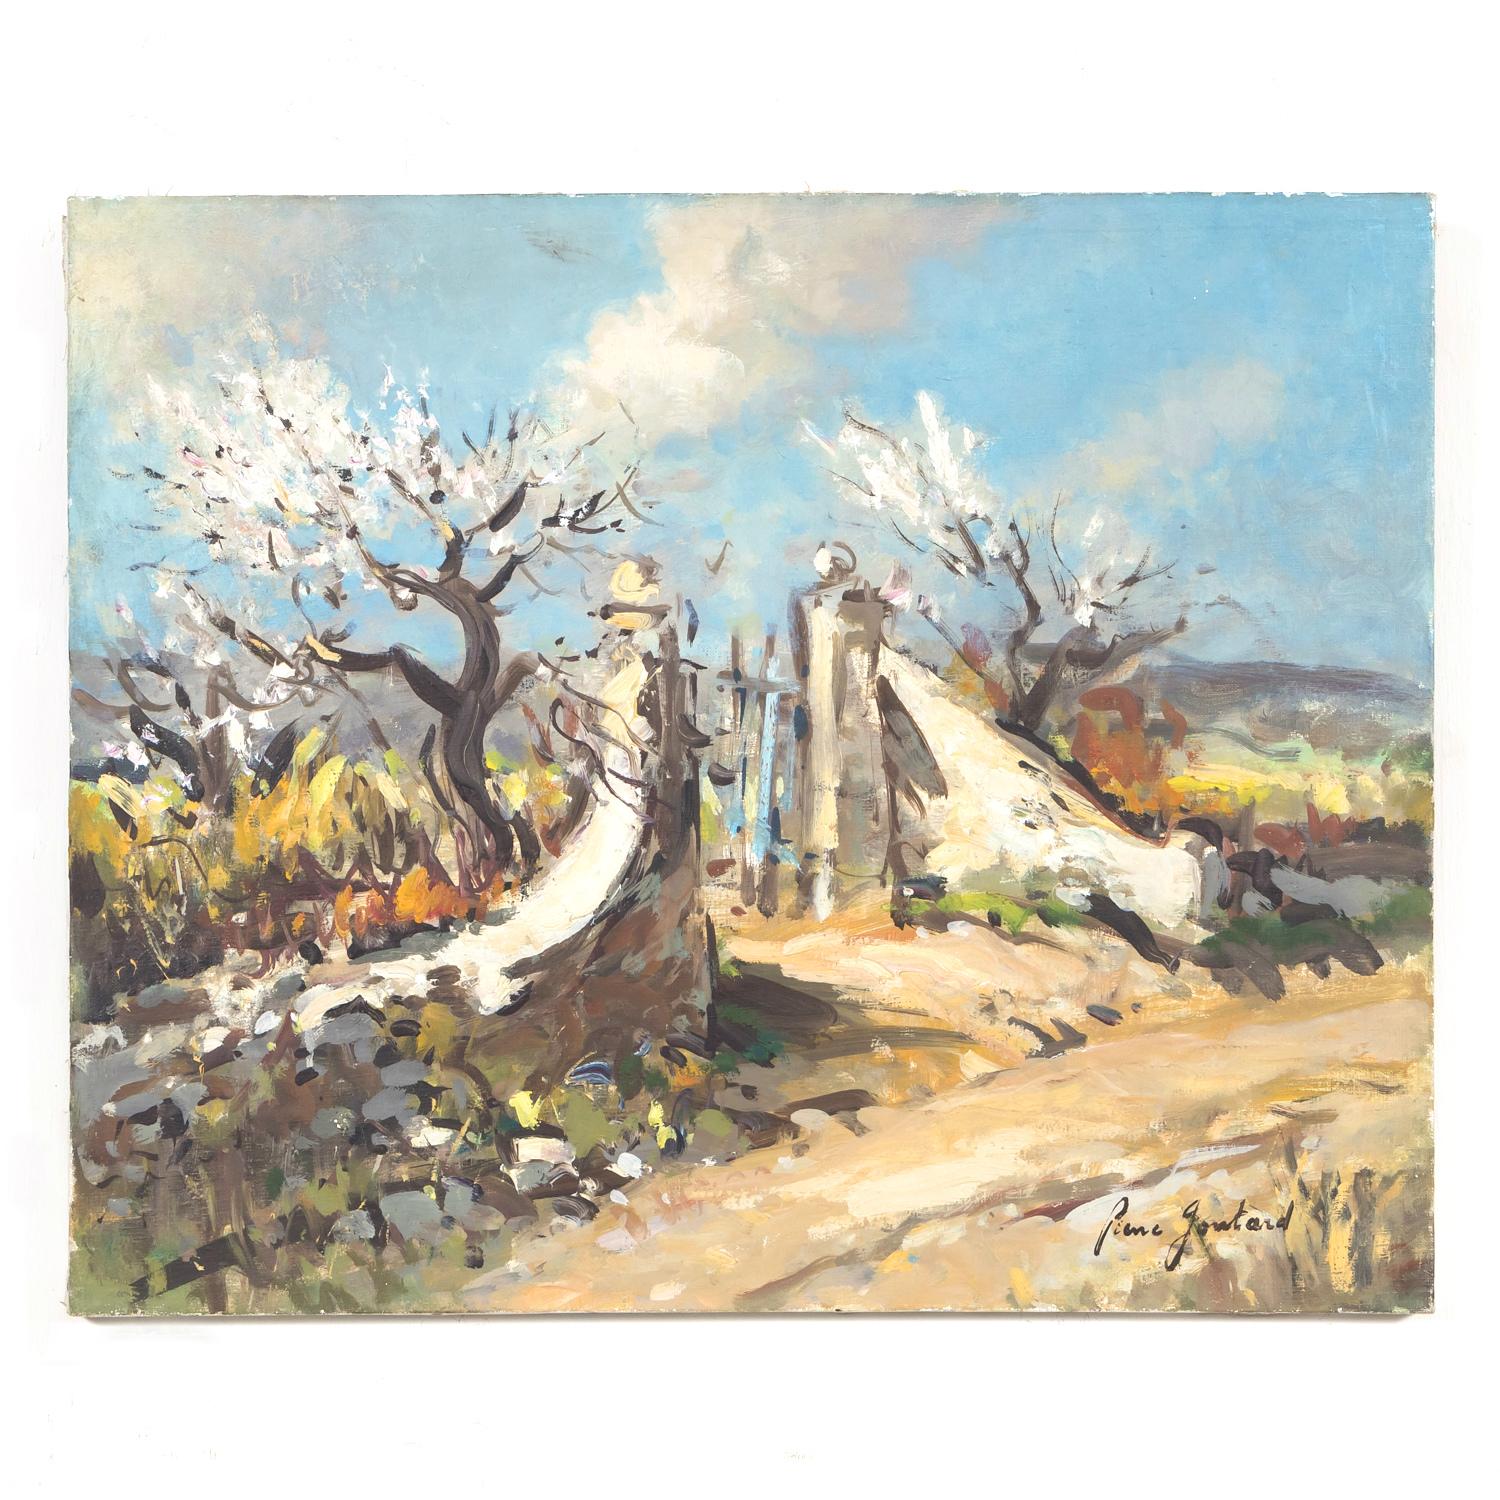 A vintage French Impressionist oil on canvas by French artist Pierre Goutard depicting Provence olive trees in a beautiful sun drenched landscape, circa 1950. Signed lower right Pierre Goutard.
Dimensions:
h - 20